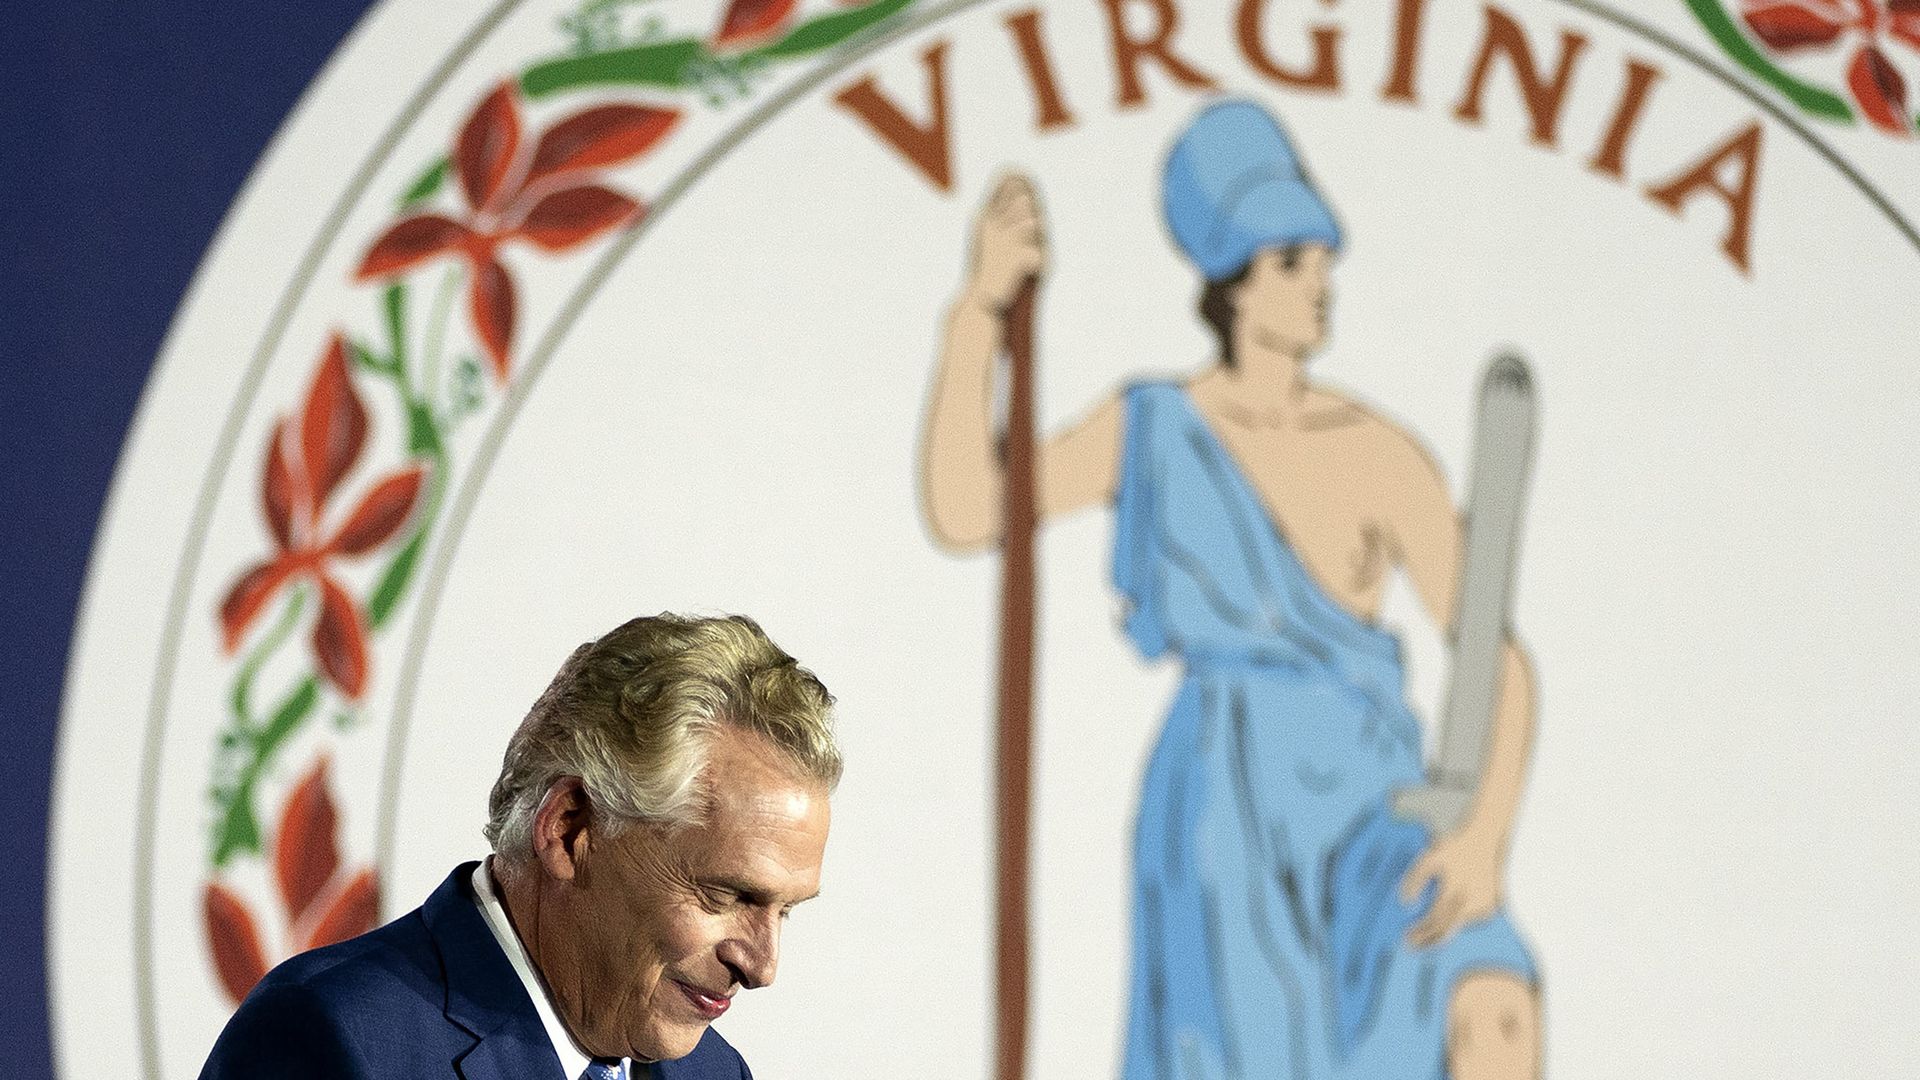 Terry McAuliffe is seen while addressing supporters on Election Day 2021.